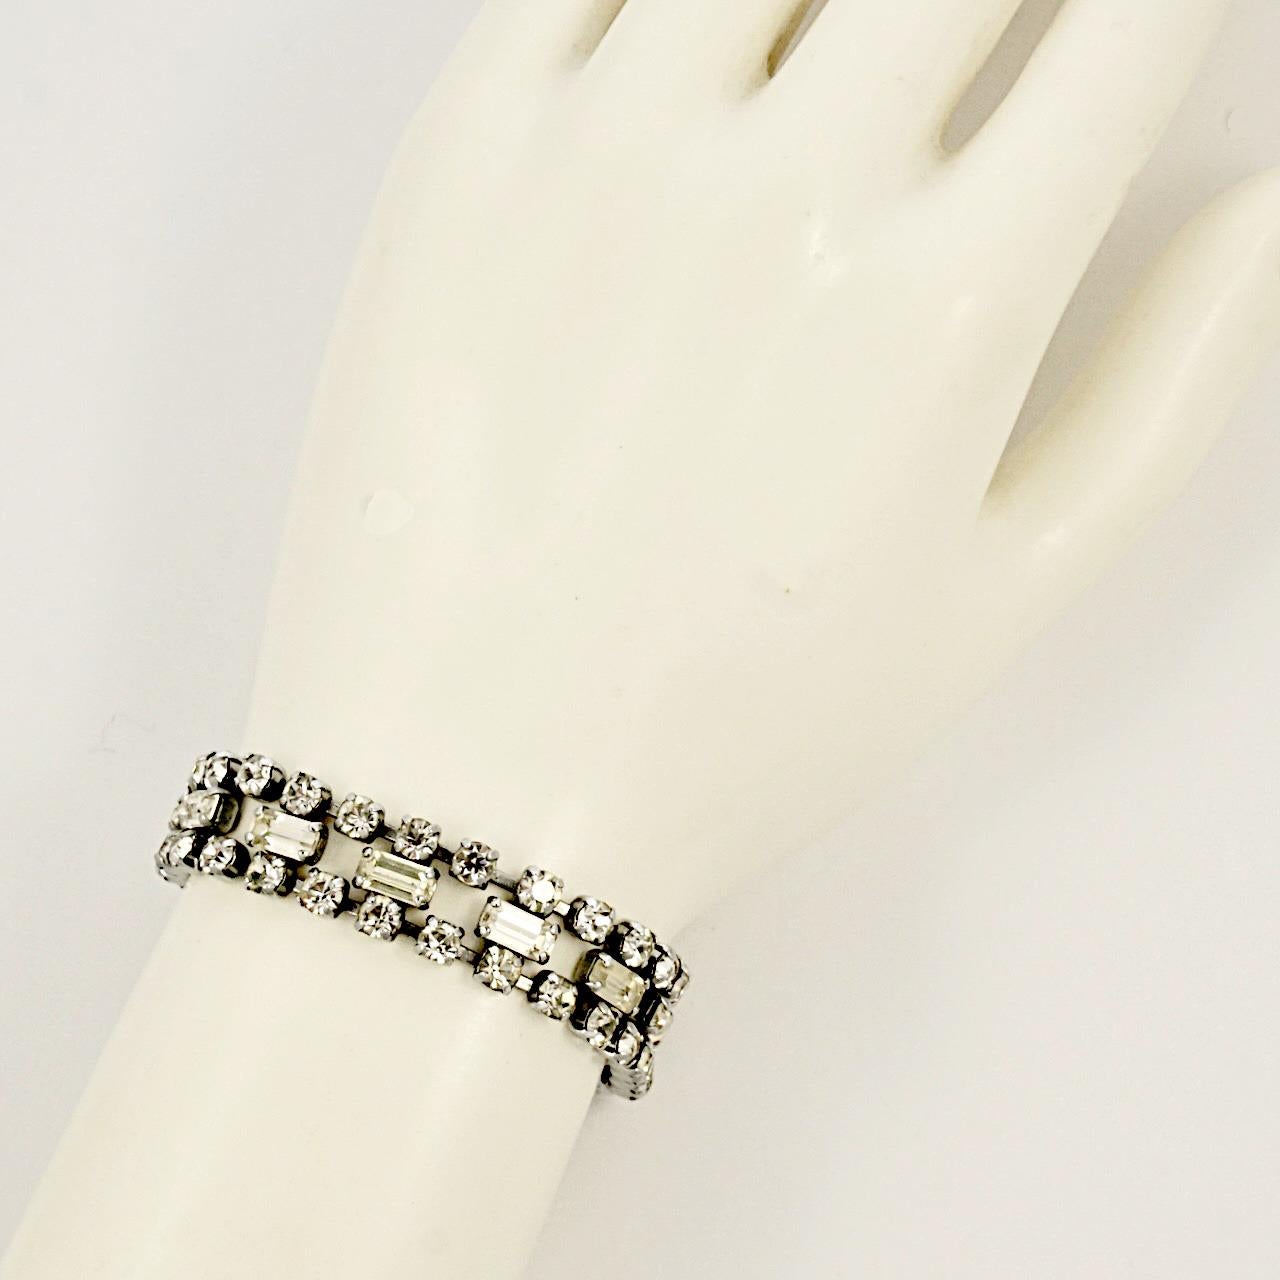 Fabulous silver tone bracelet, with sparkling baguette and round rhinestones. Measuring length 17.4 cm / 6.85 inches by width 1.2 cm / .47 inch. The bracelet is in very good condition.

This is a beautiful vintage bracelet for the evening or a